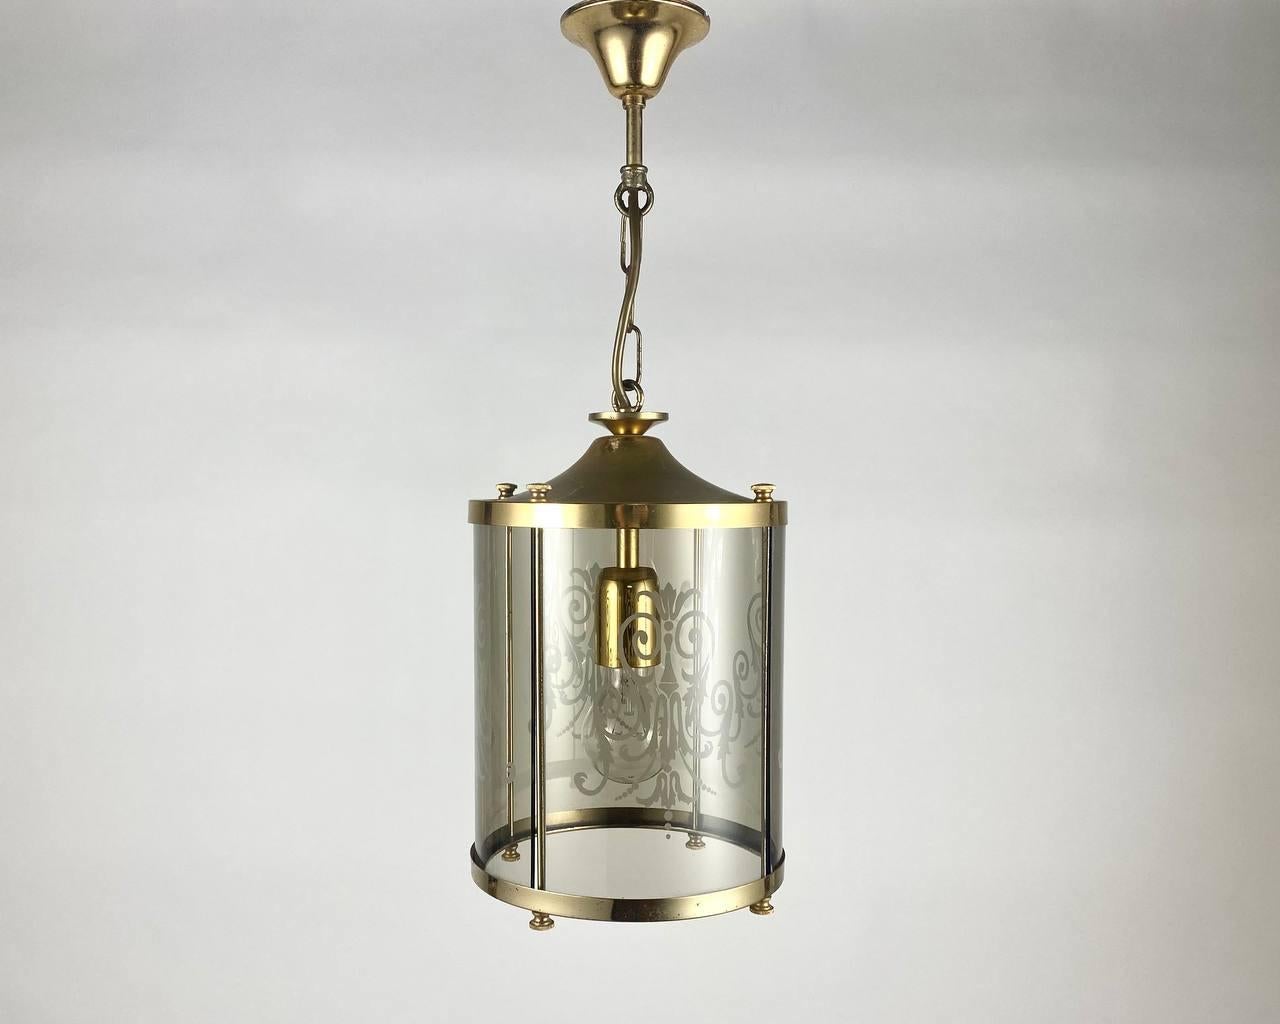 Beautiful cylindrical lantern made of smoked glass and metal with engraving. 

Vintage Lantern made of glass and metal combines vintage charm and modern design creativity! Carefully selected materials, amazing handmade details and the reverent